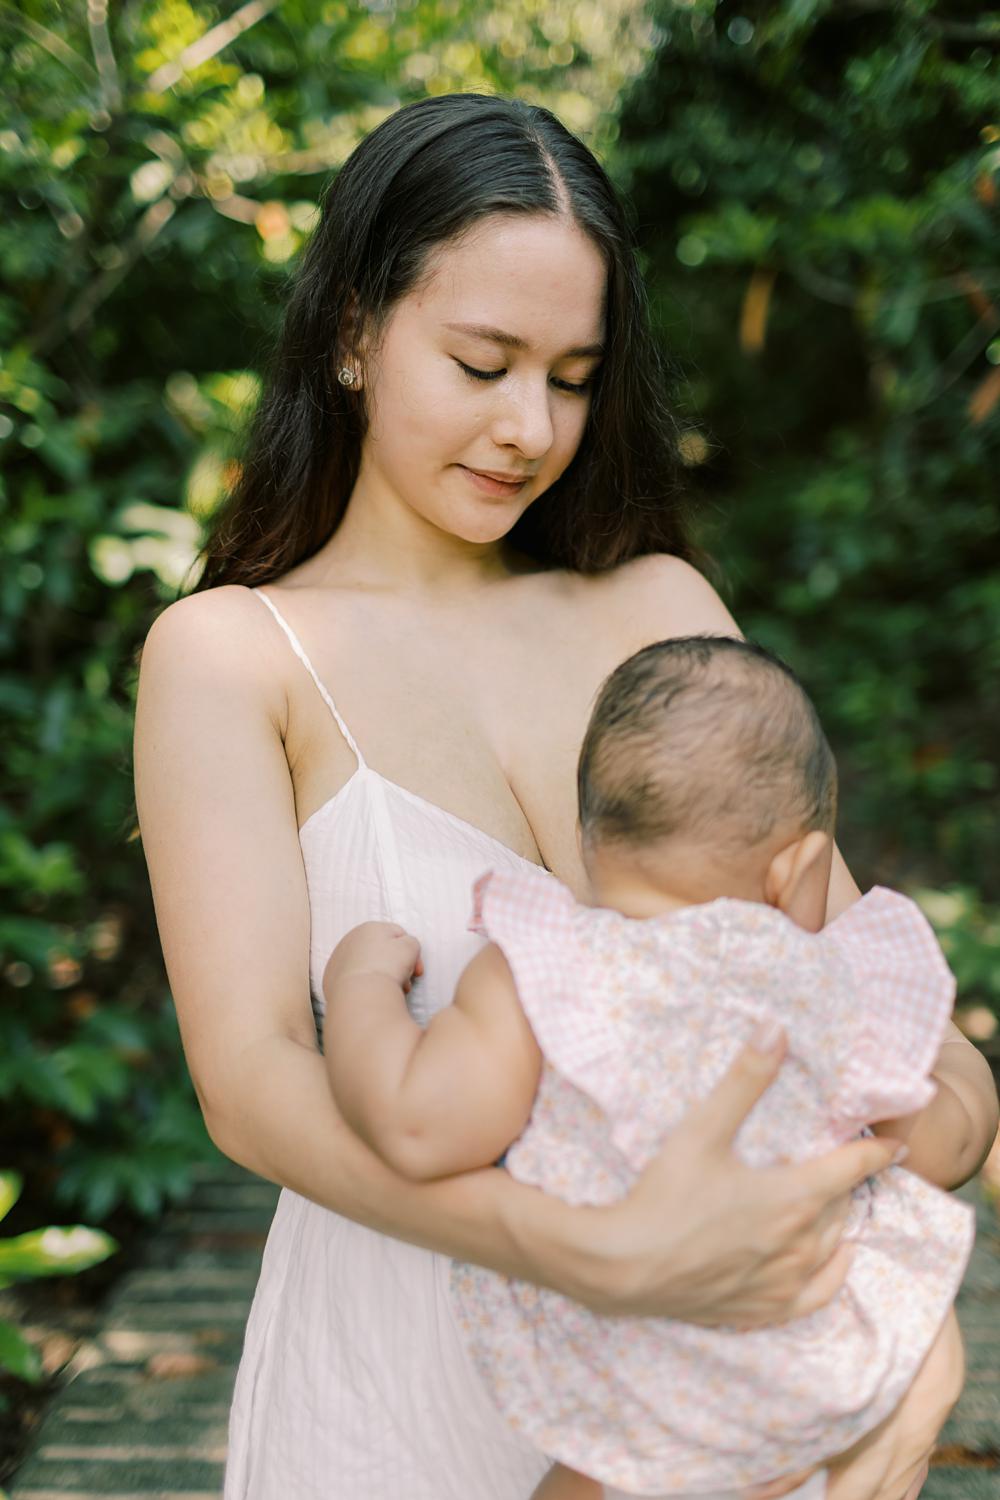 mother is holding her baby who is in a pink dress